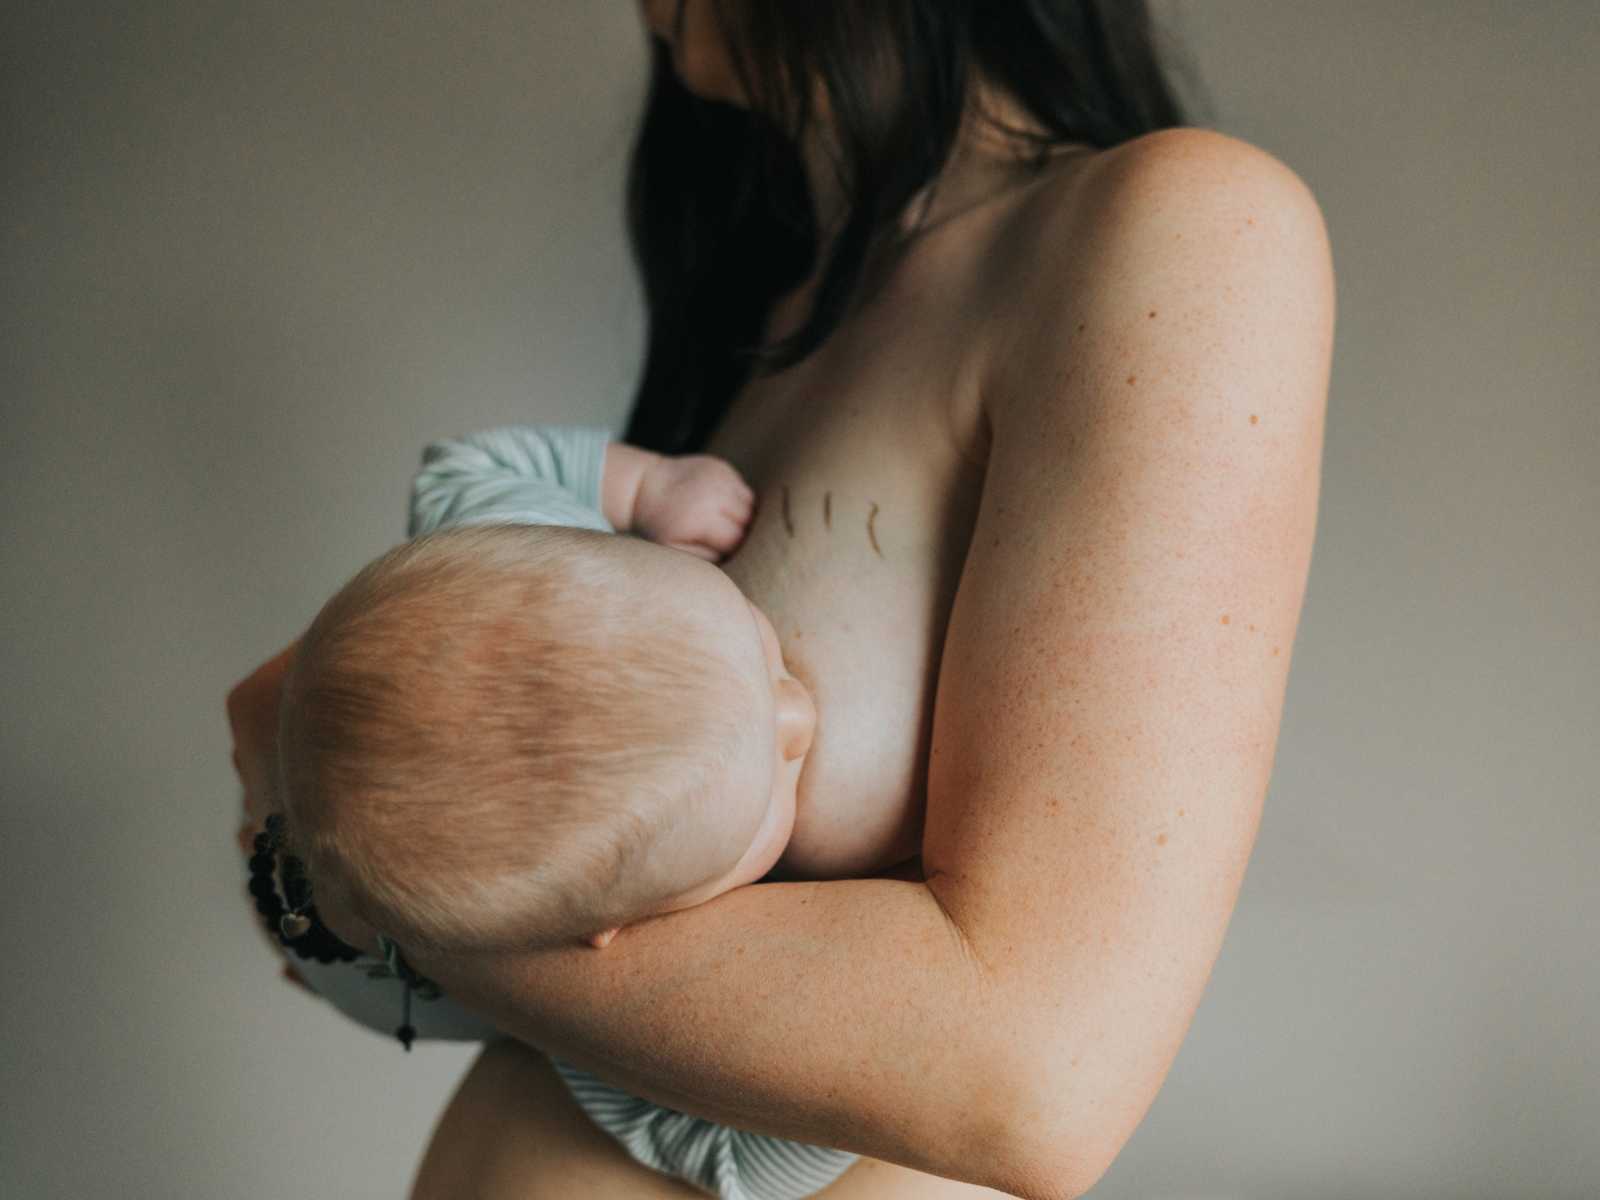 Close up of woman breastfeeding with stretch marks on her breast covered in gold dust